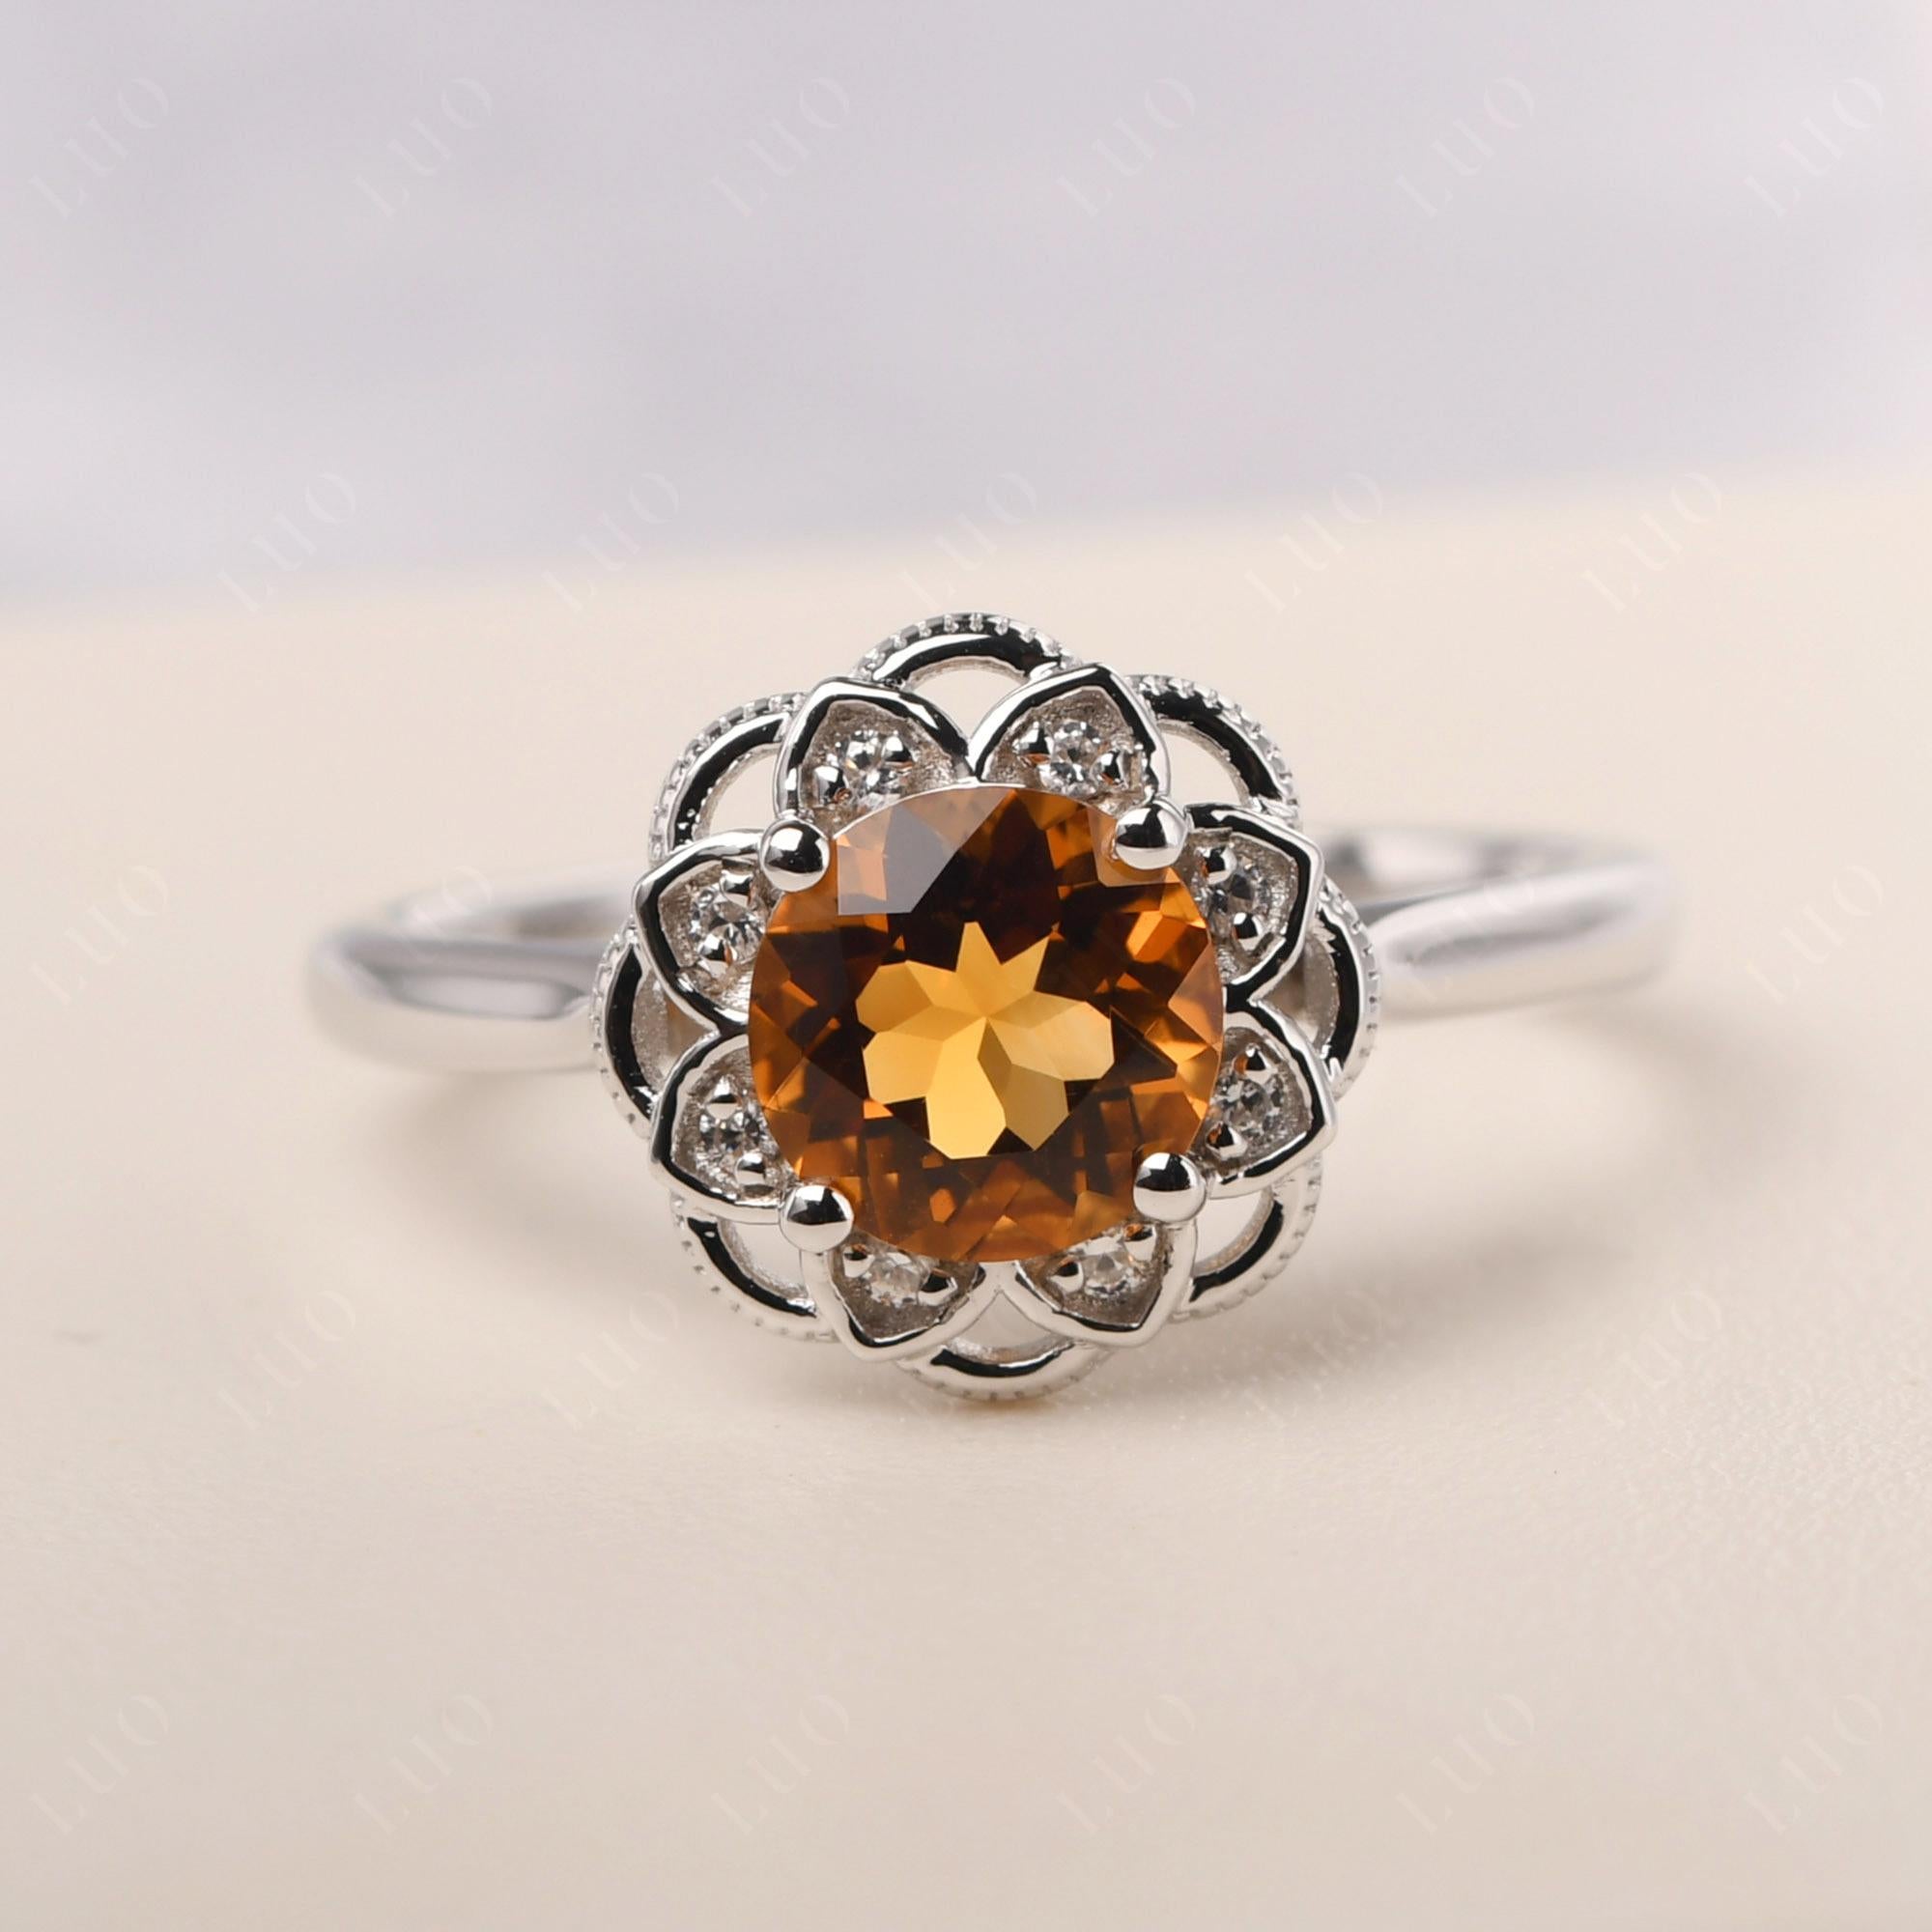 Citrine Vintage Inspired Filigree Ring - LUO Jewelry